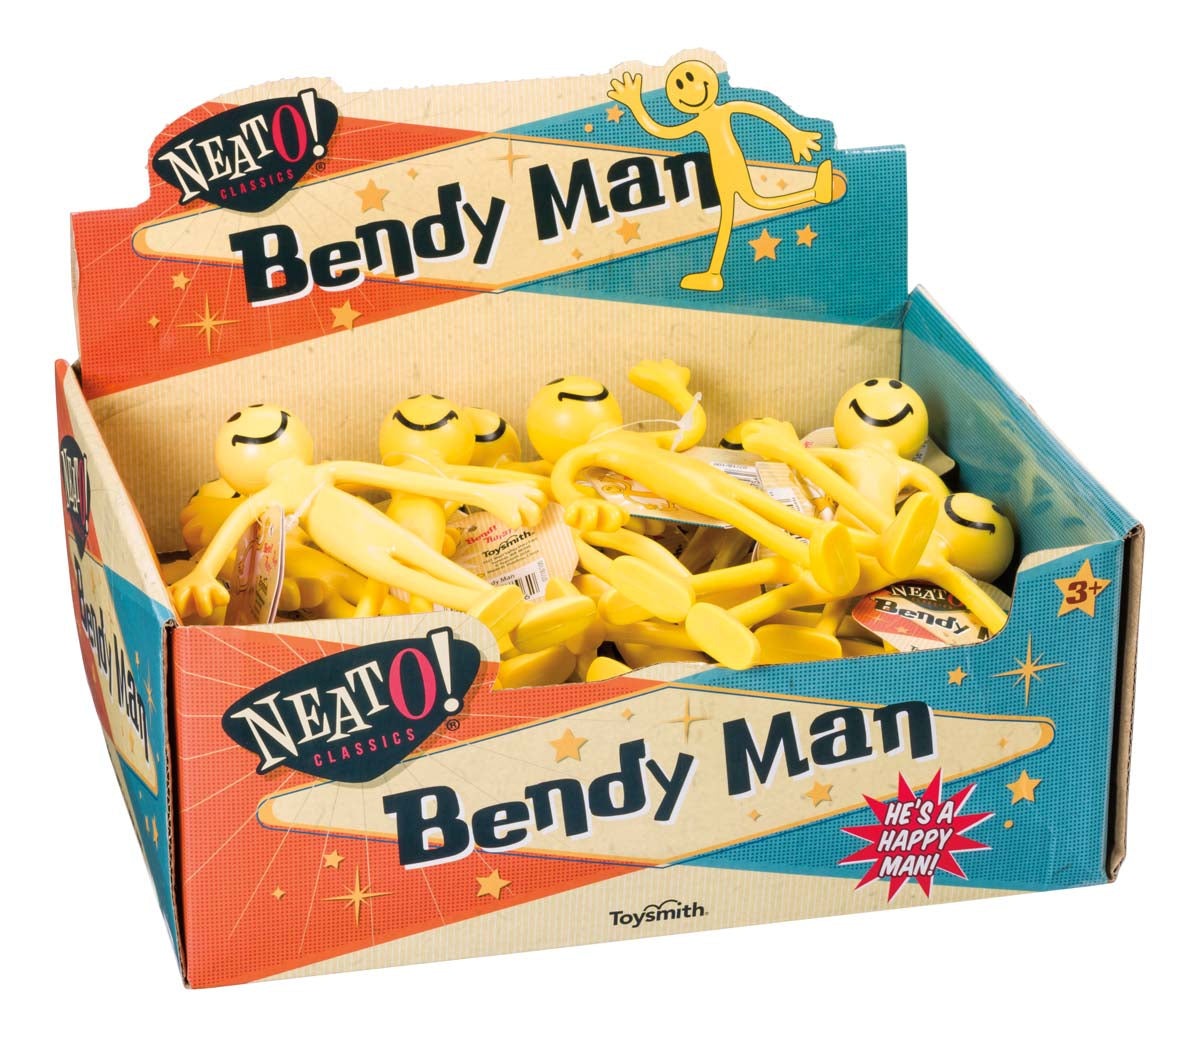 Retail package of 36 Neato! Bendy Man